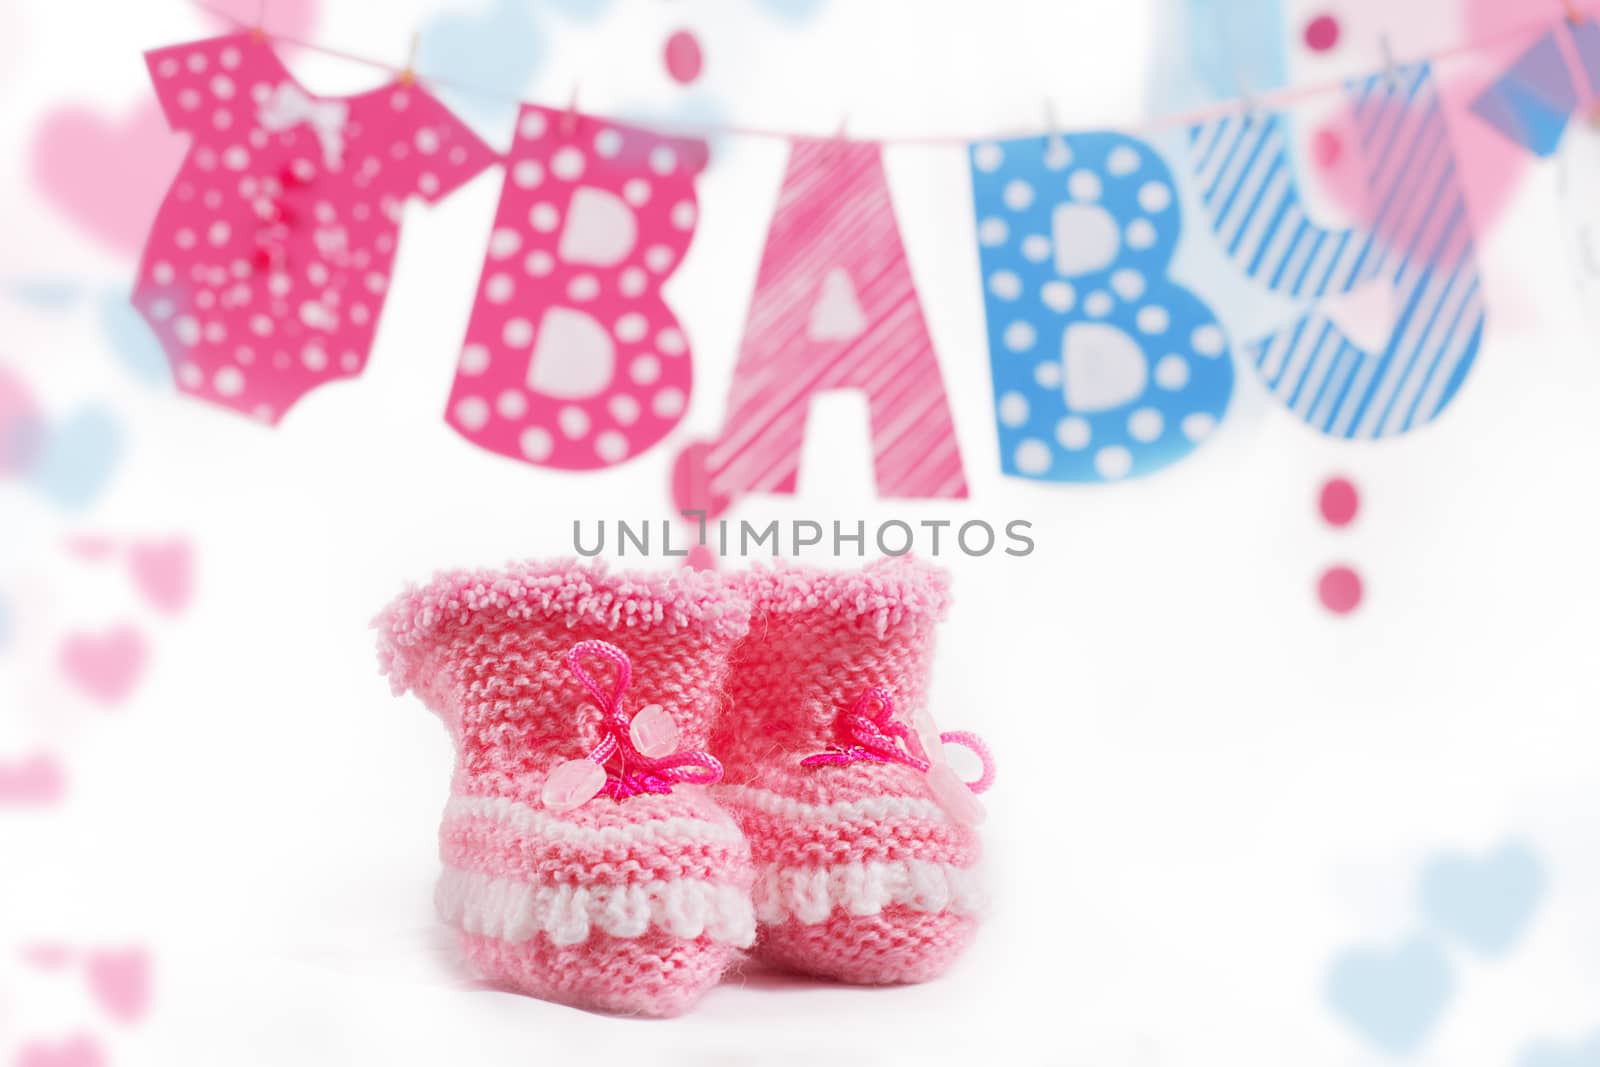 Pink bootees and baby word garland as decoration